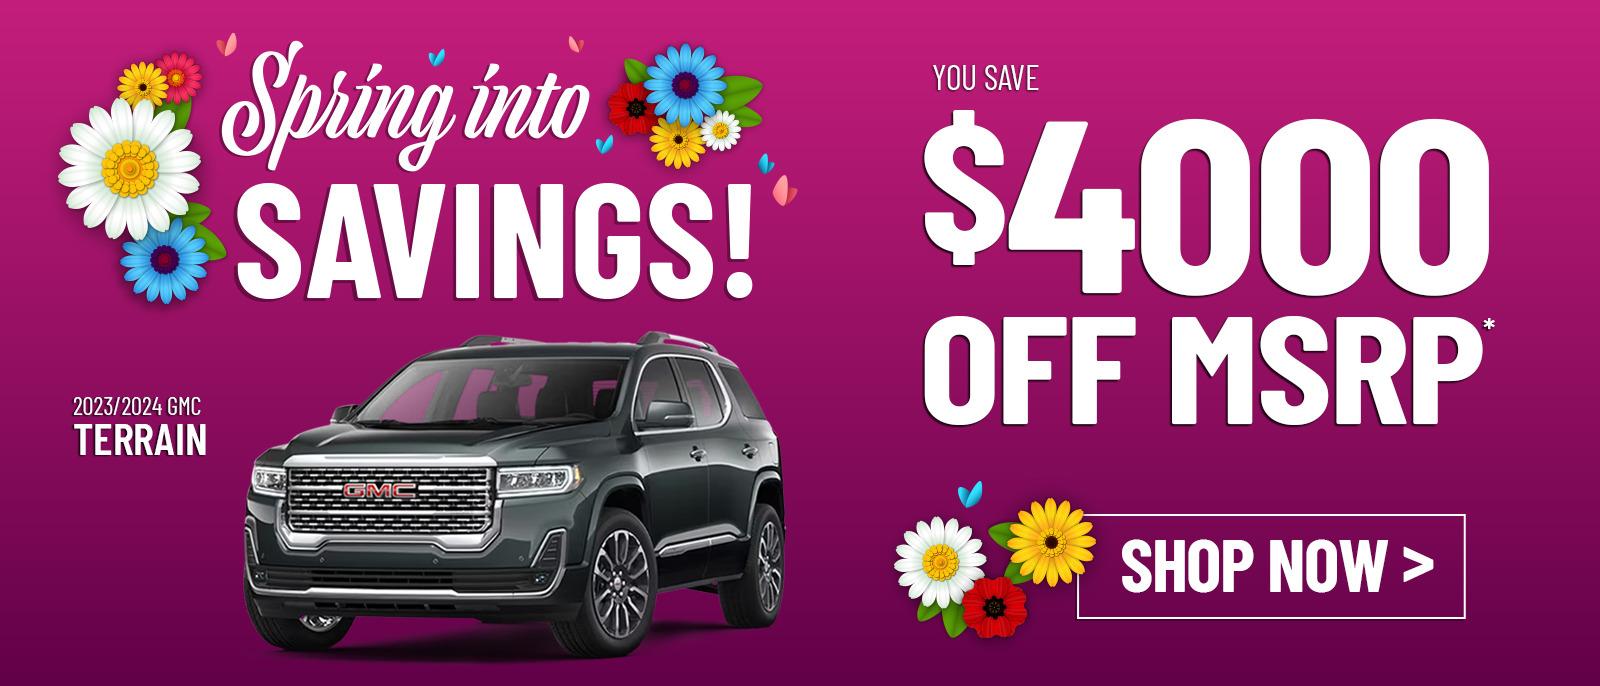 2023/2024 GMC Terrain - You Save $4000 Off MSRP